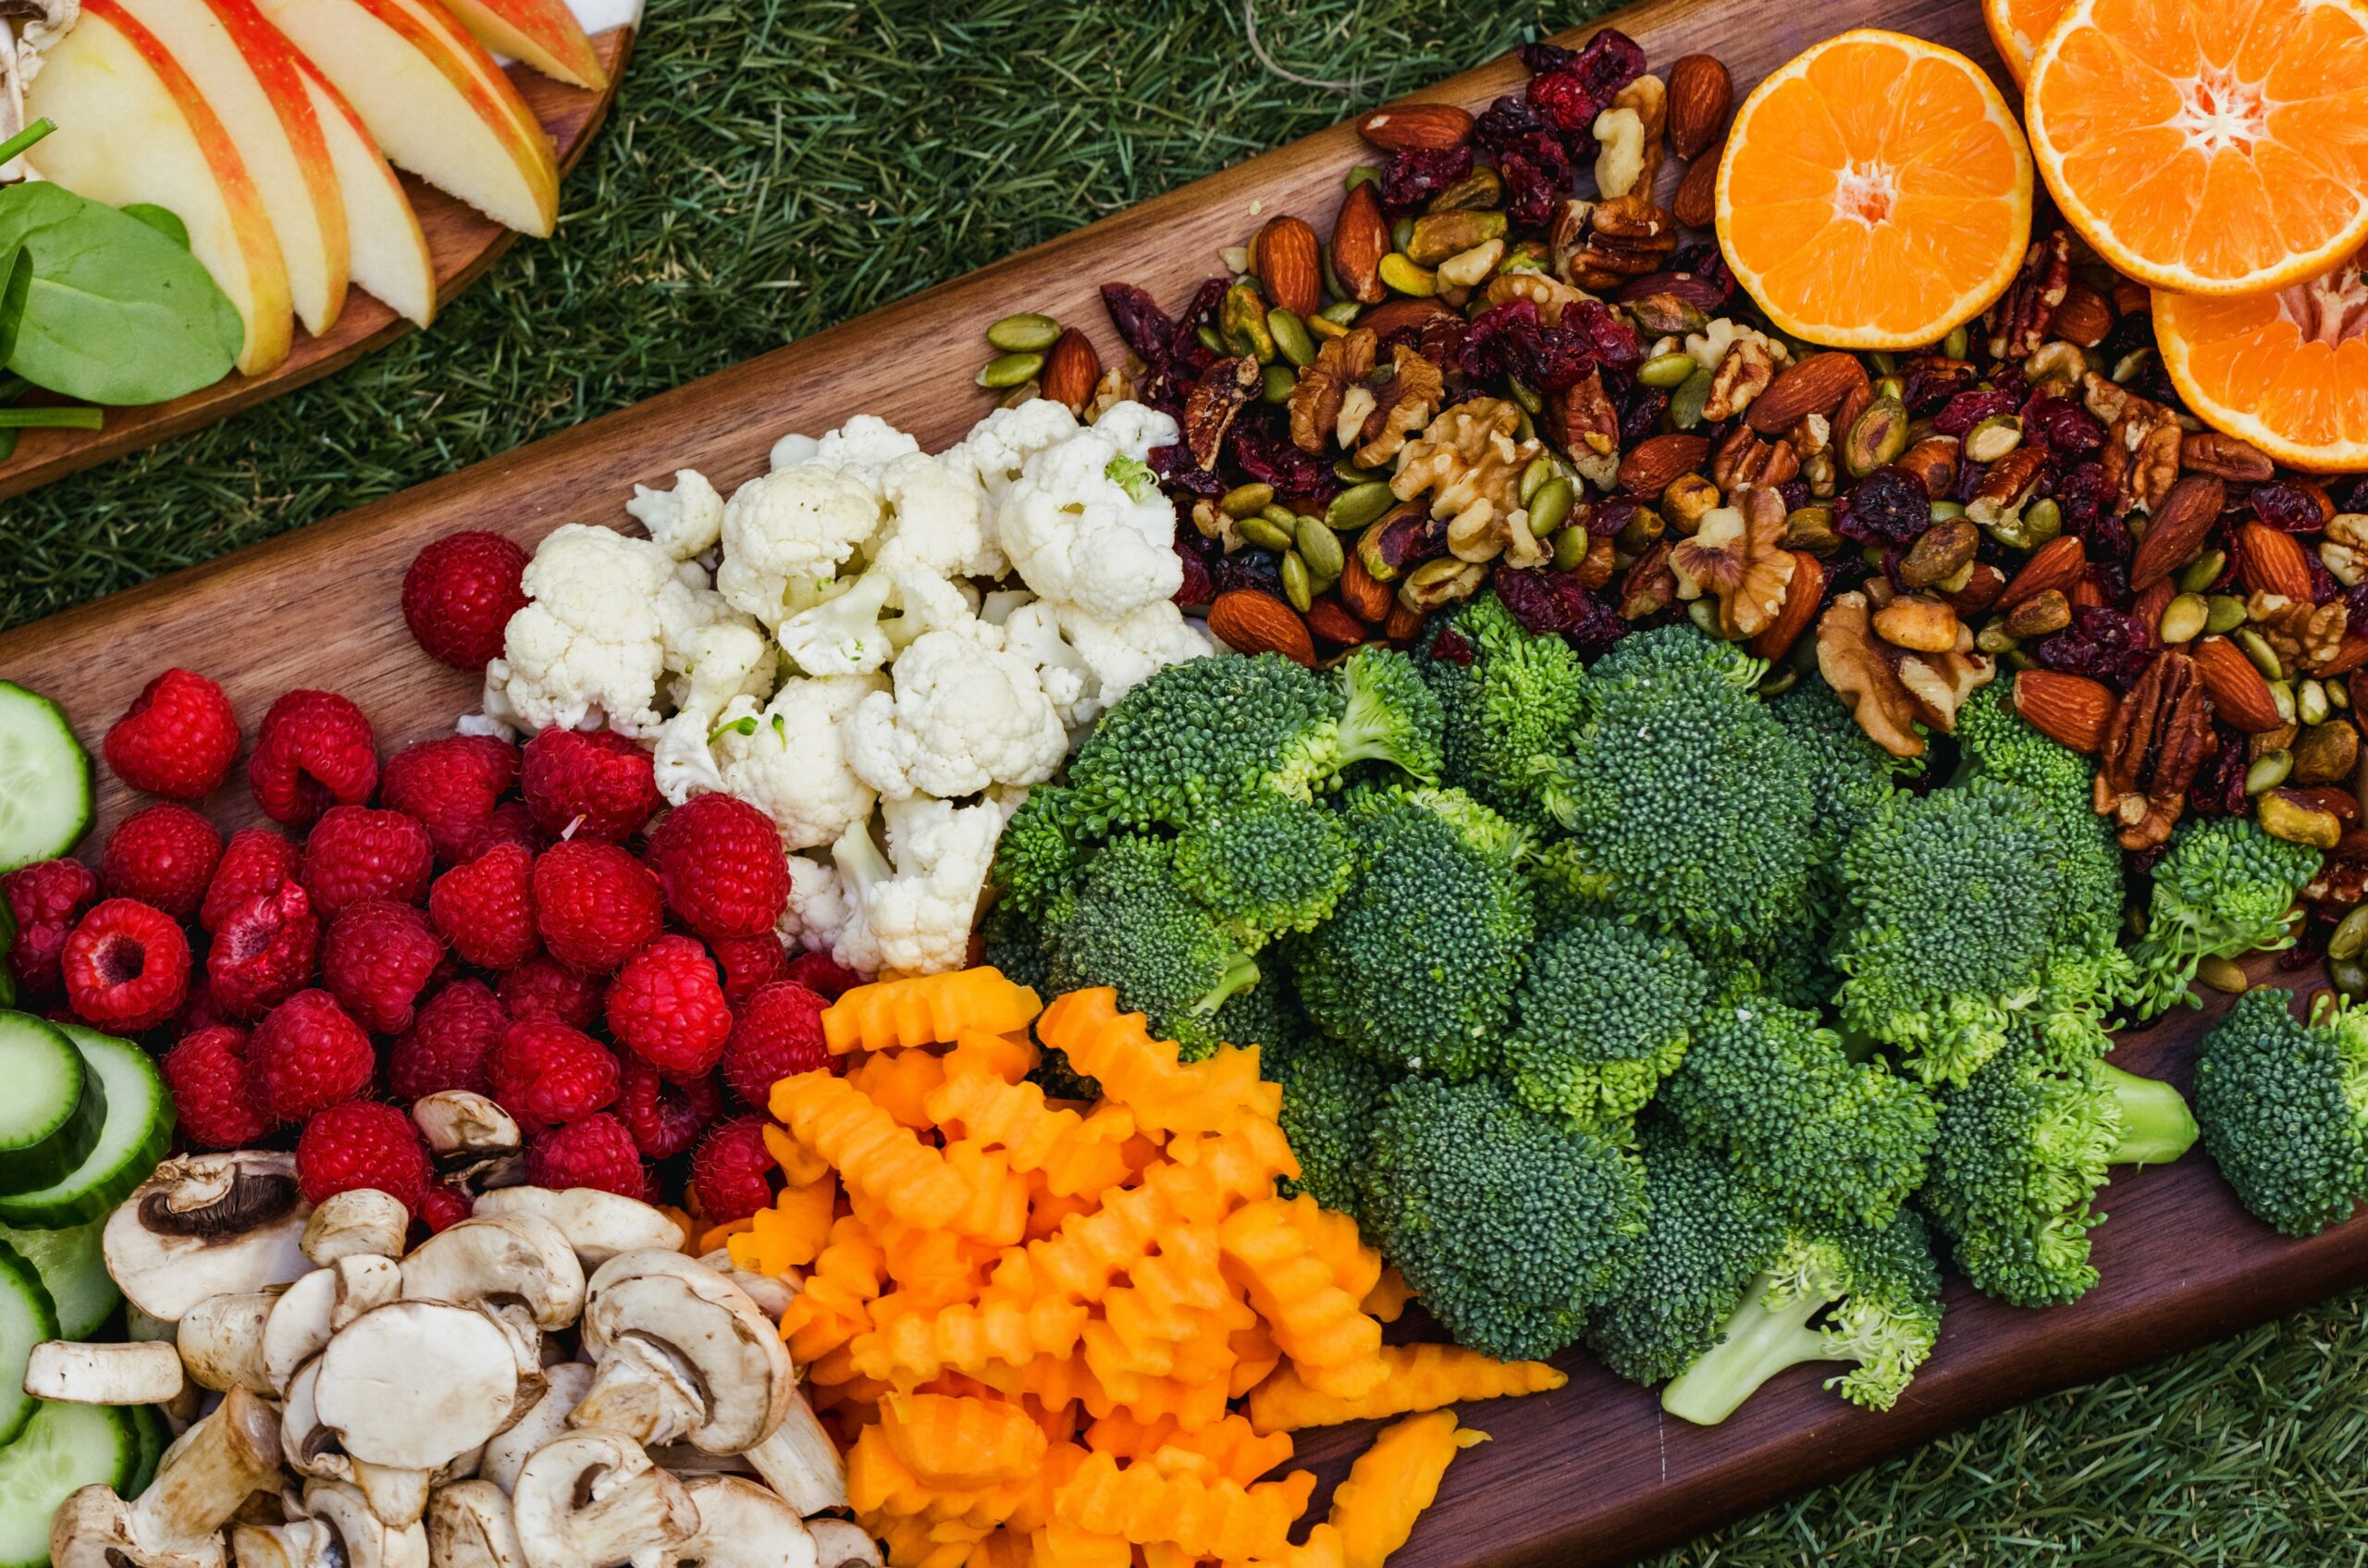 Board with vegetables, fruits, and nuts, cauliflower, carrots, broccoli,